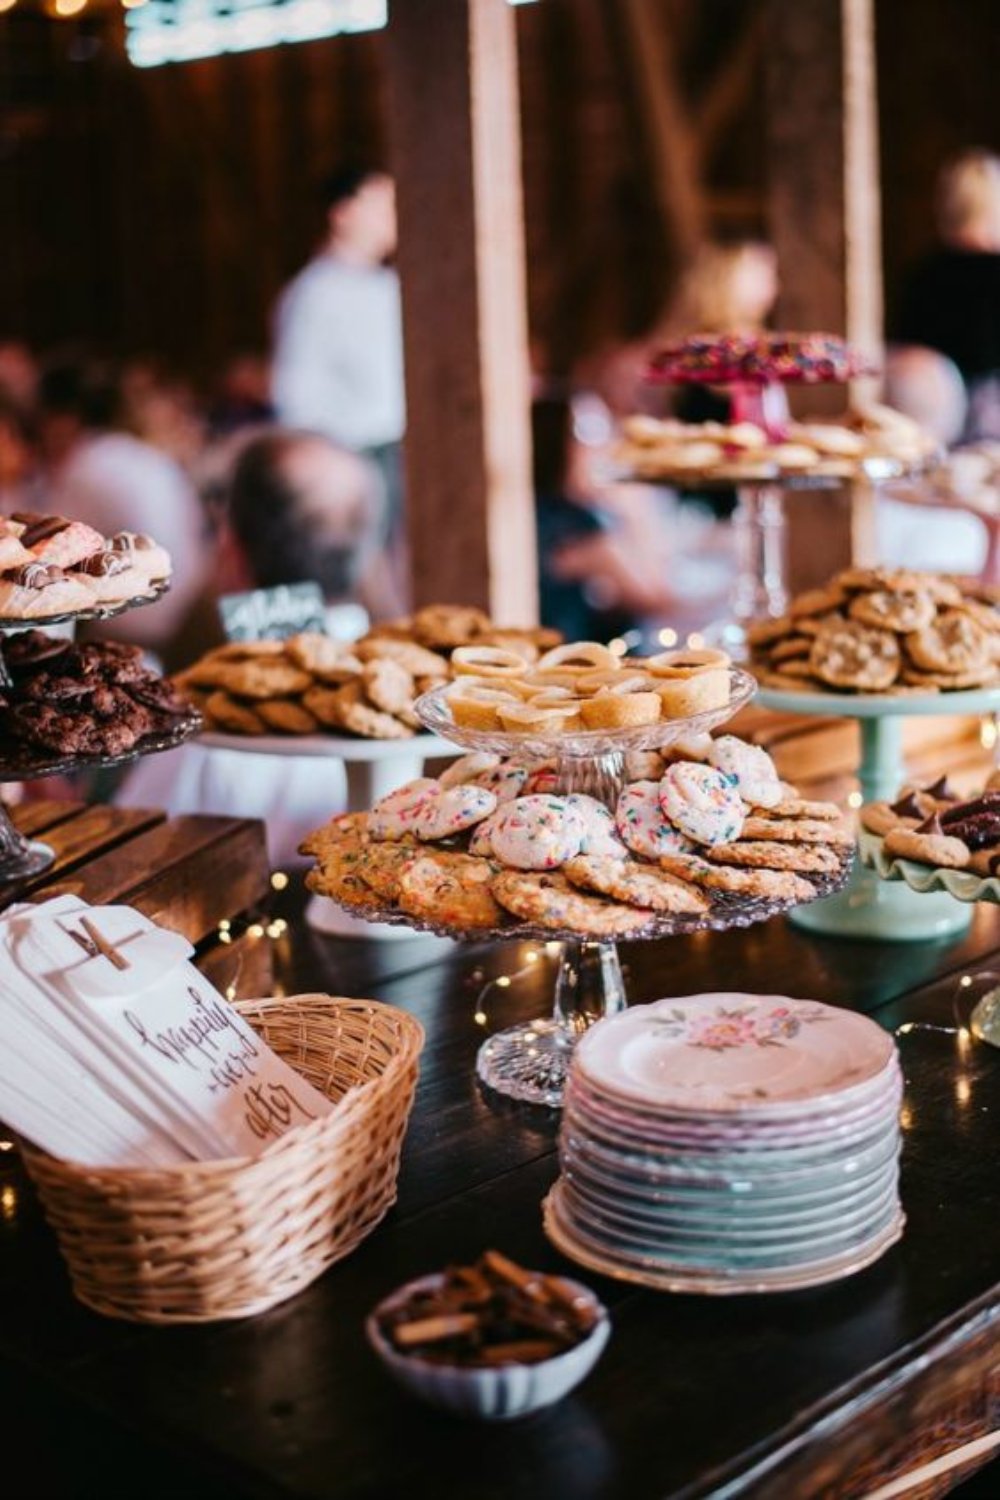 Dessert Table Food Ideas Your Guests Will Love